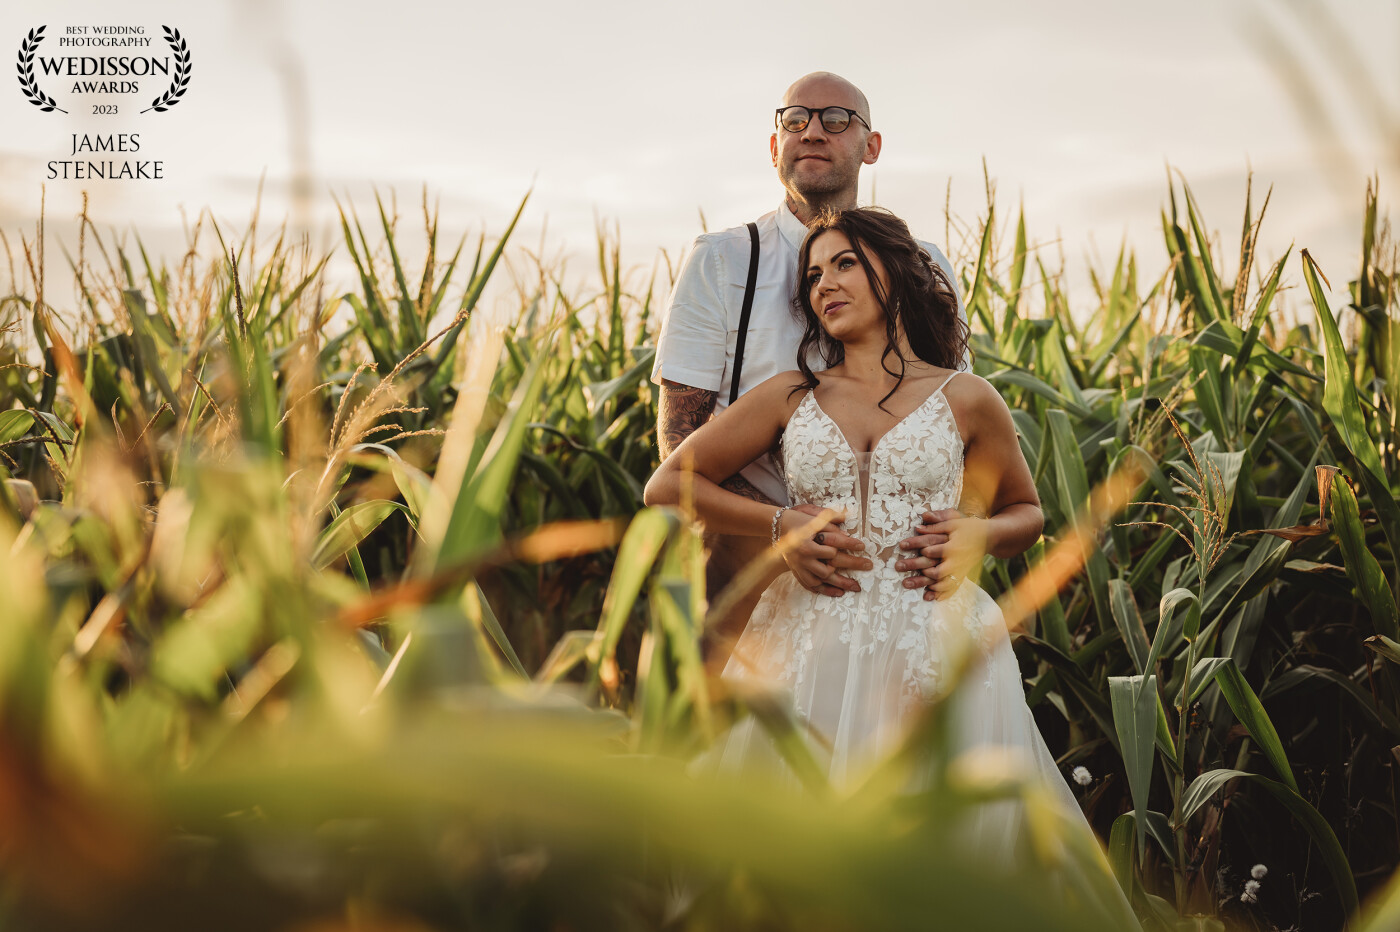 Couple taking a timeout reflecting on the day in a cornfield